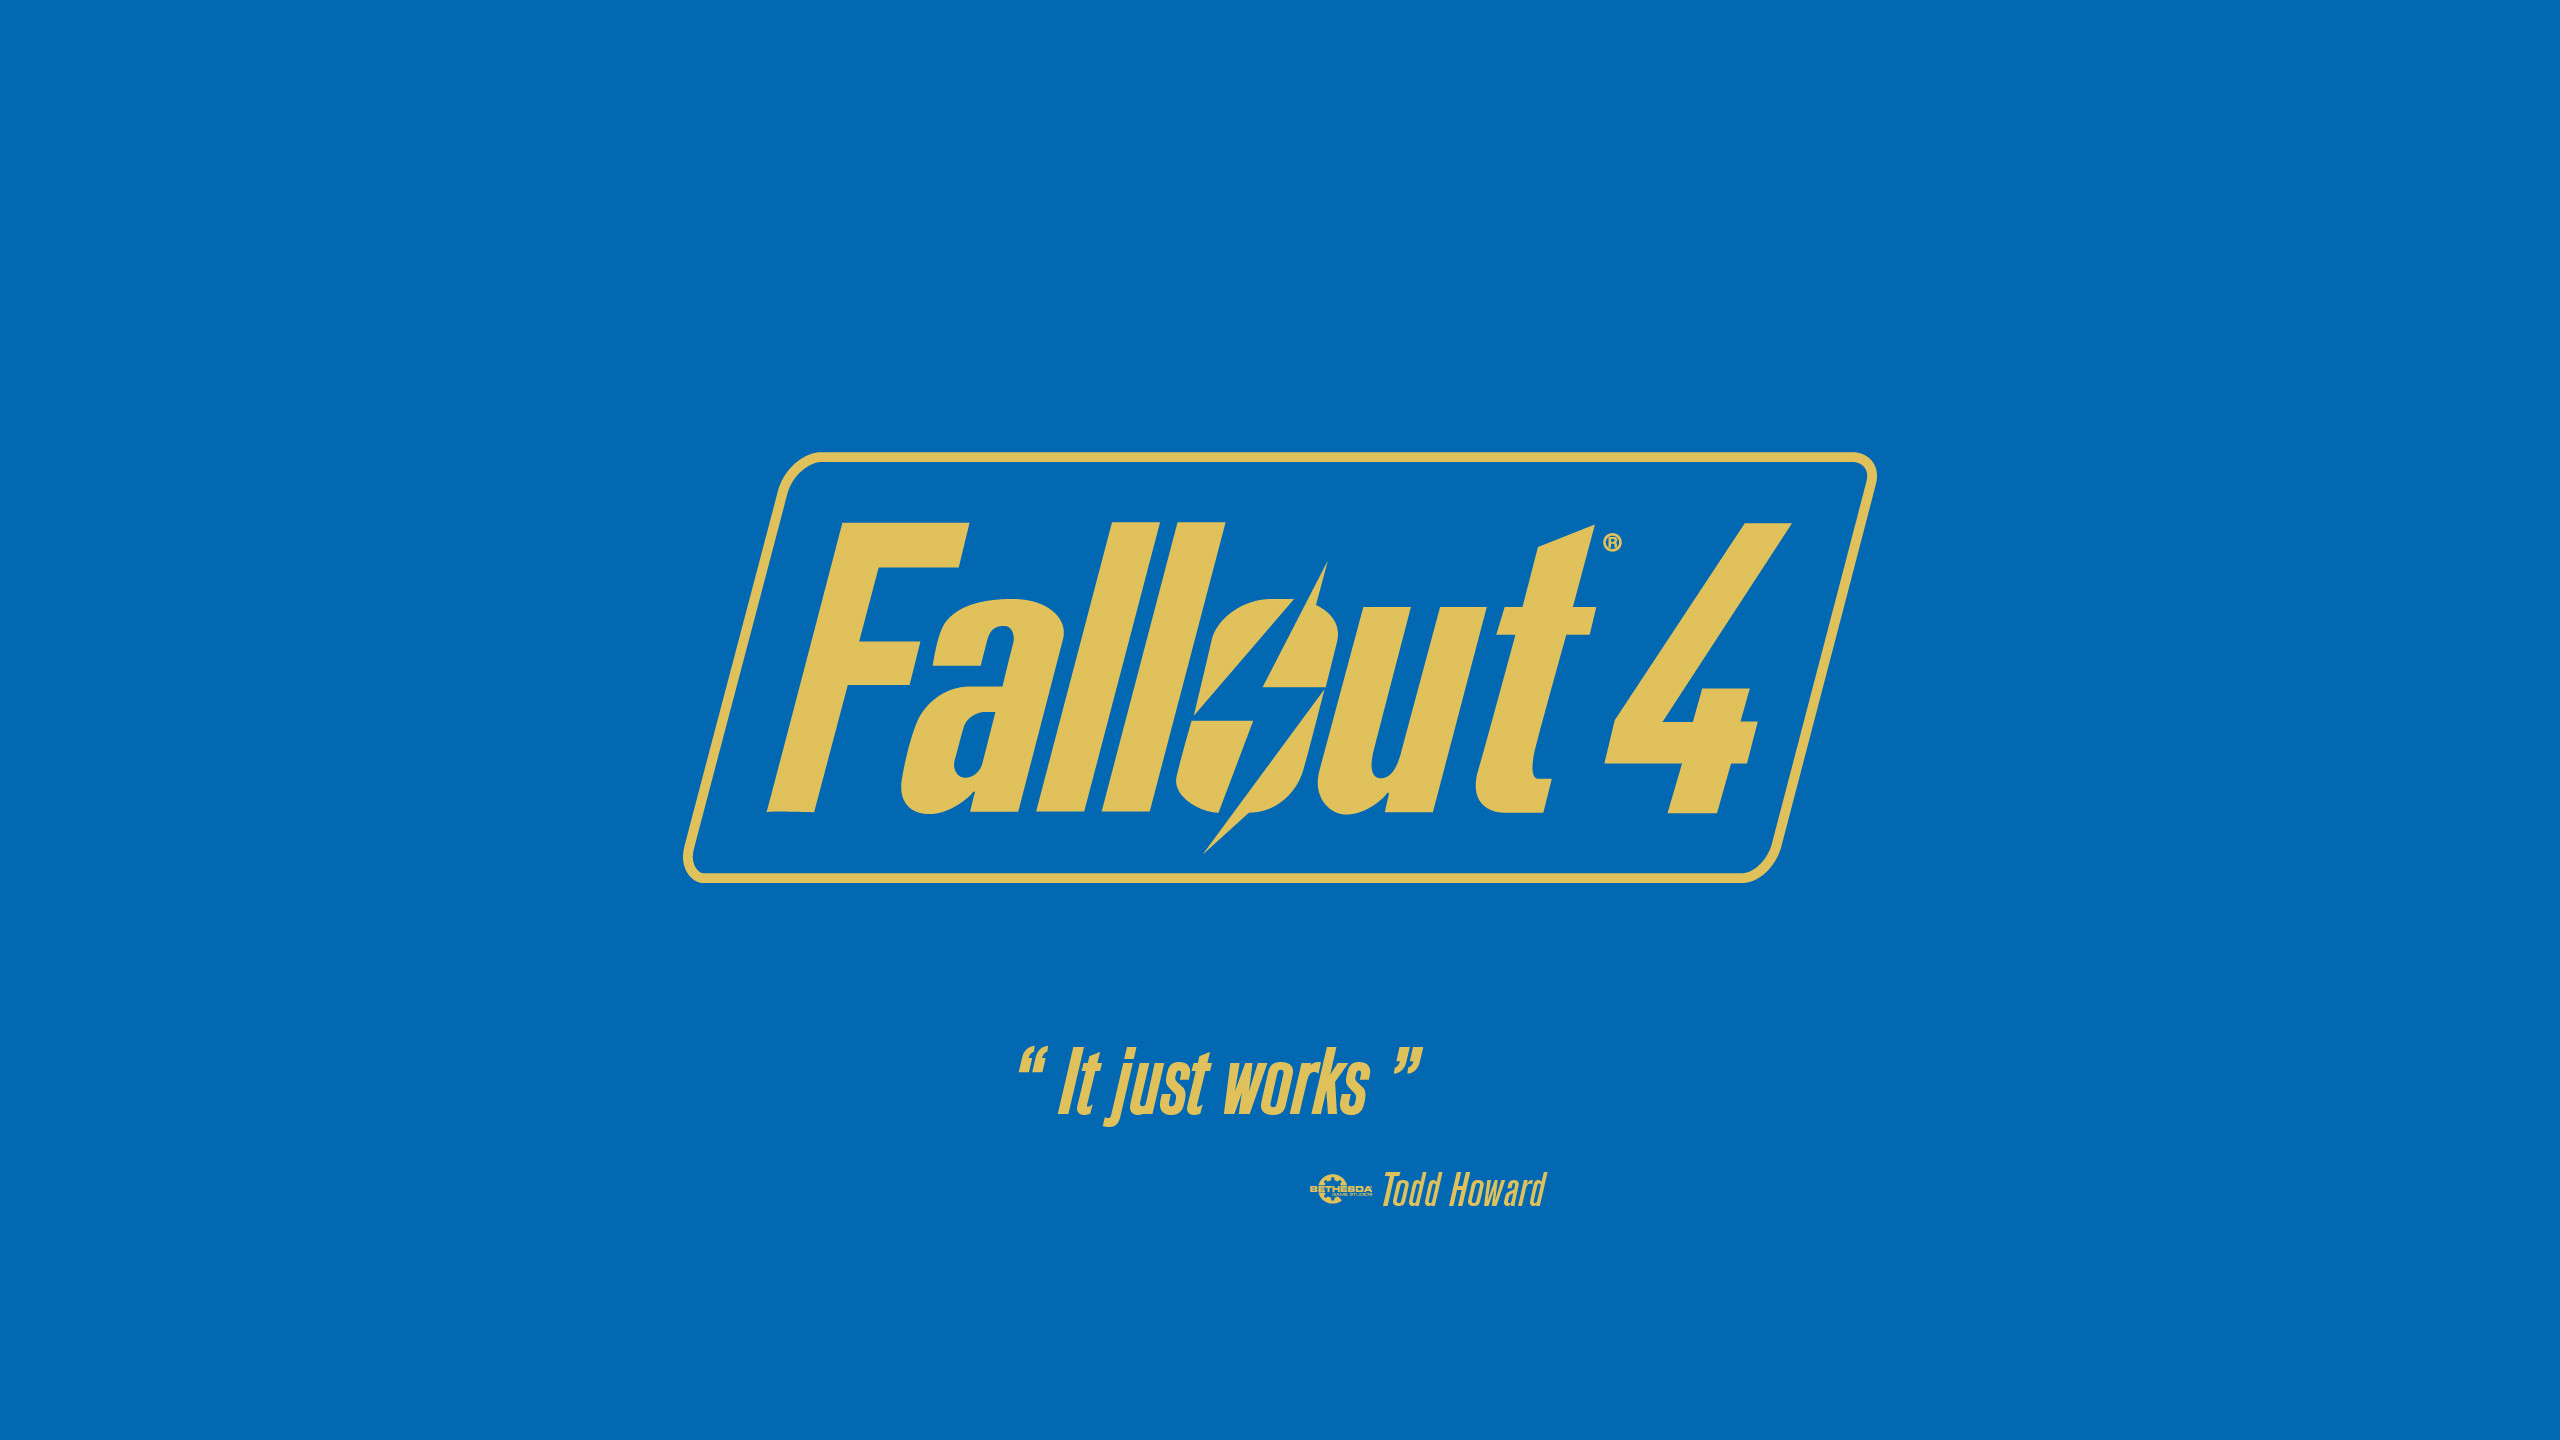 2560x1440 2560 x 1440 Wallpaper with Fallout 4 logo and the E3 quote from Todd Howard